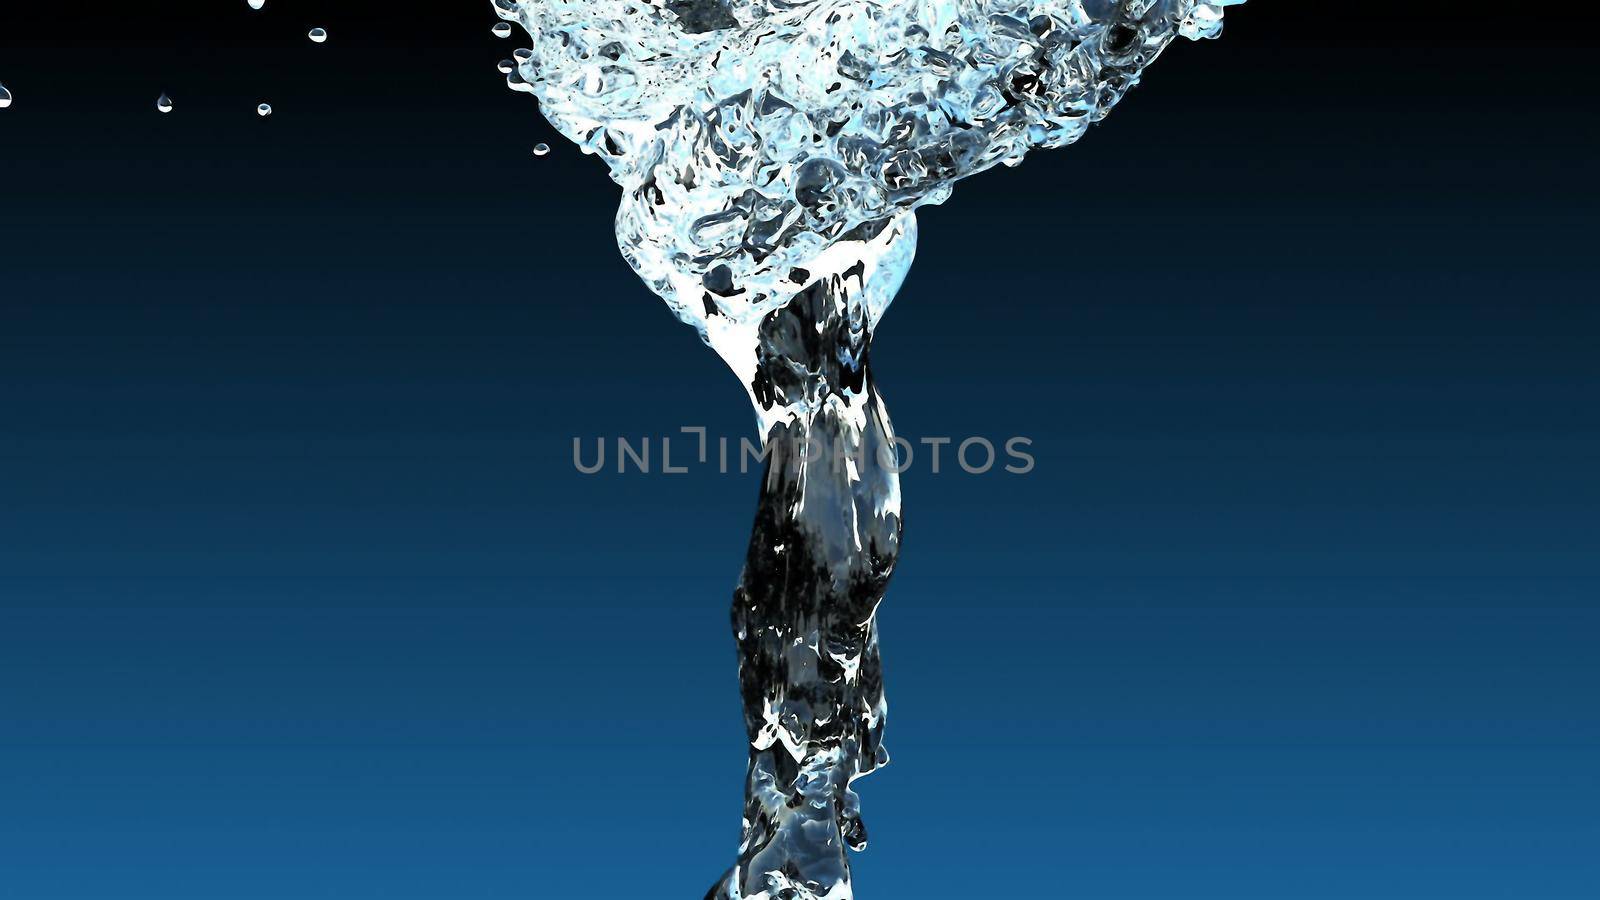 Water splash with bubbles of air 3D rendering by designprojects